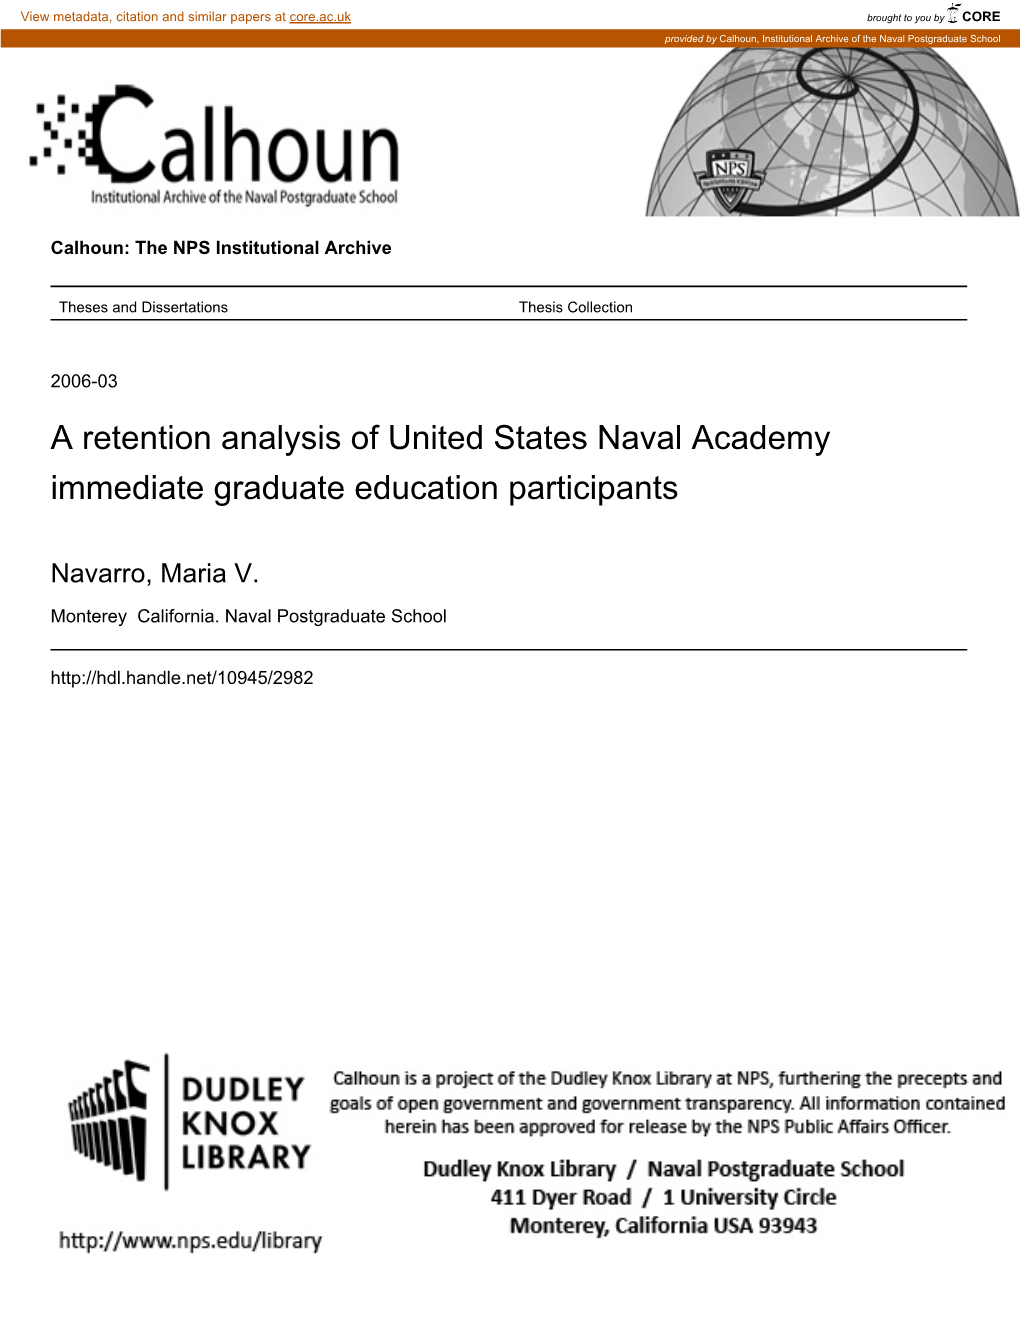 A Retention Analysis of United States Naval Academy Immediate Graduate Education Participants